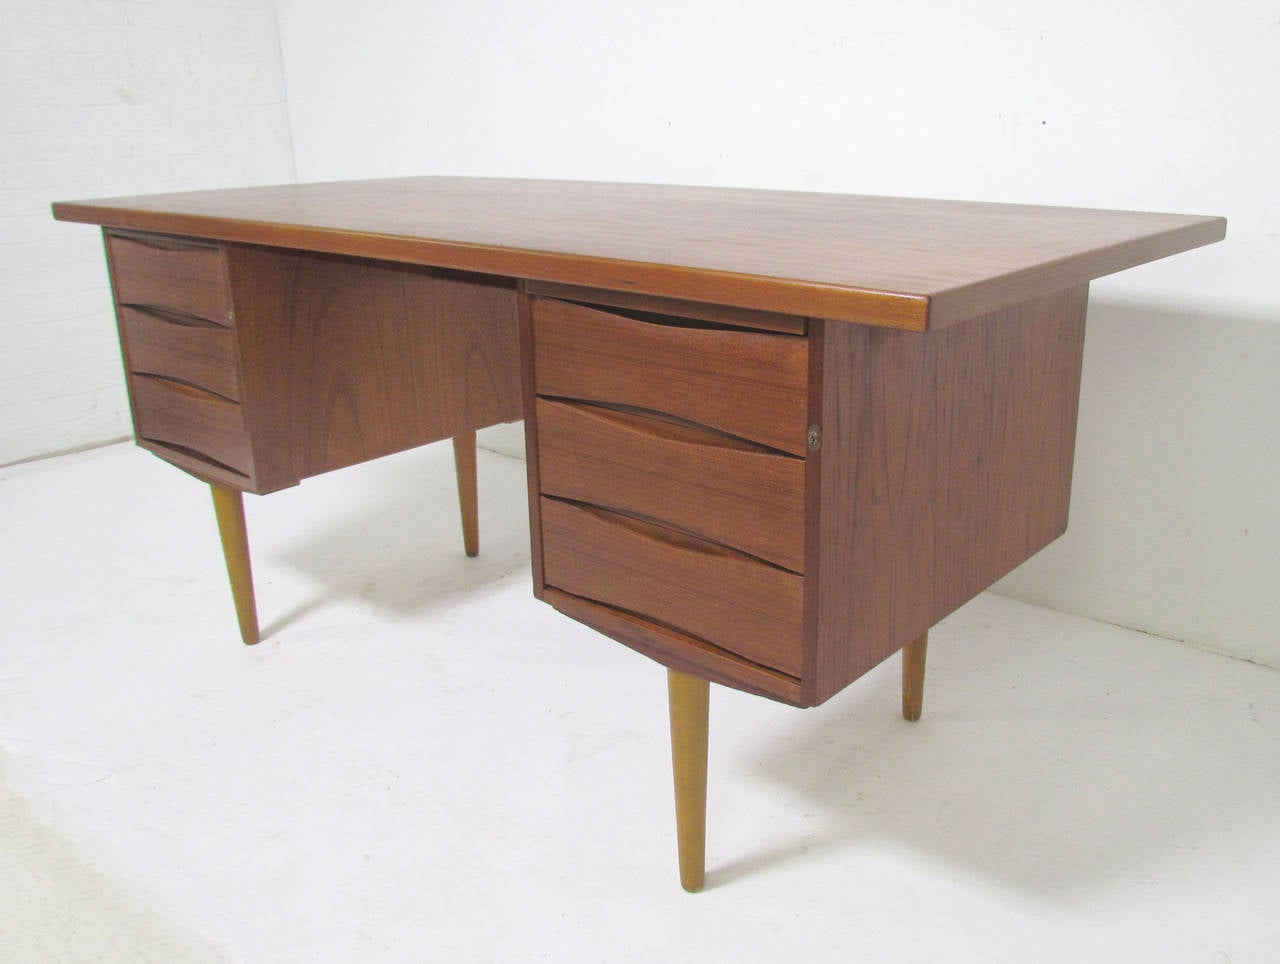 Teak desk by Skeie, Made in Norway for Westnofa Imports. Features inset carved bowtie fronts similar to the designs of Arne Vodder. The right side features a pull-out writing surface and a single (deep) file drawer; the left side features three